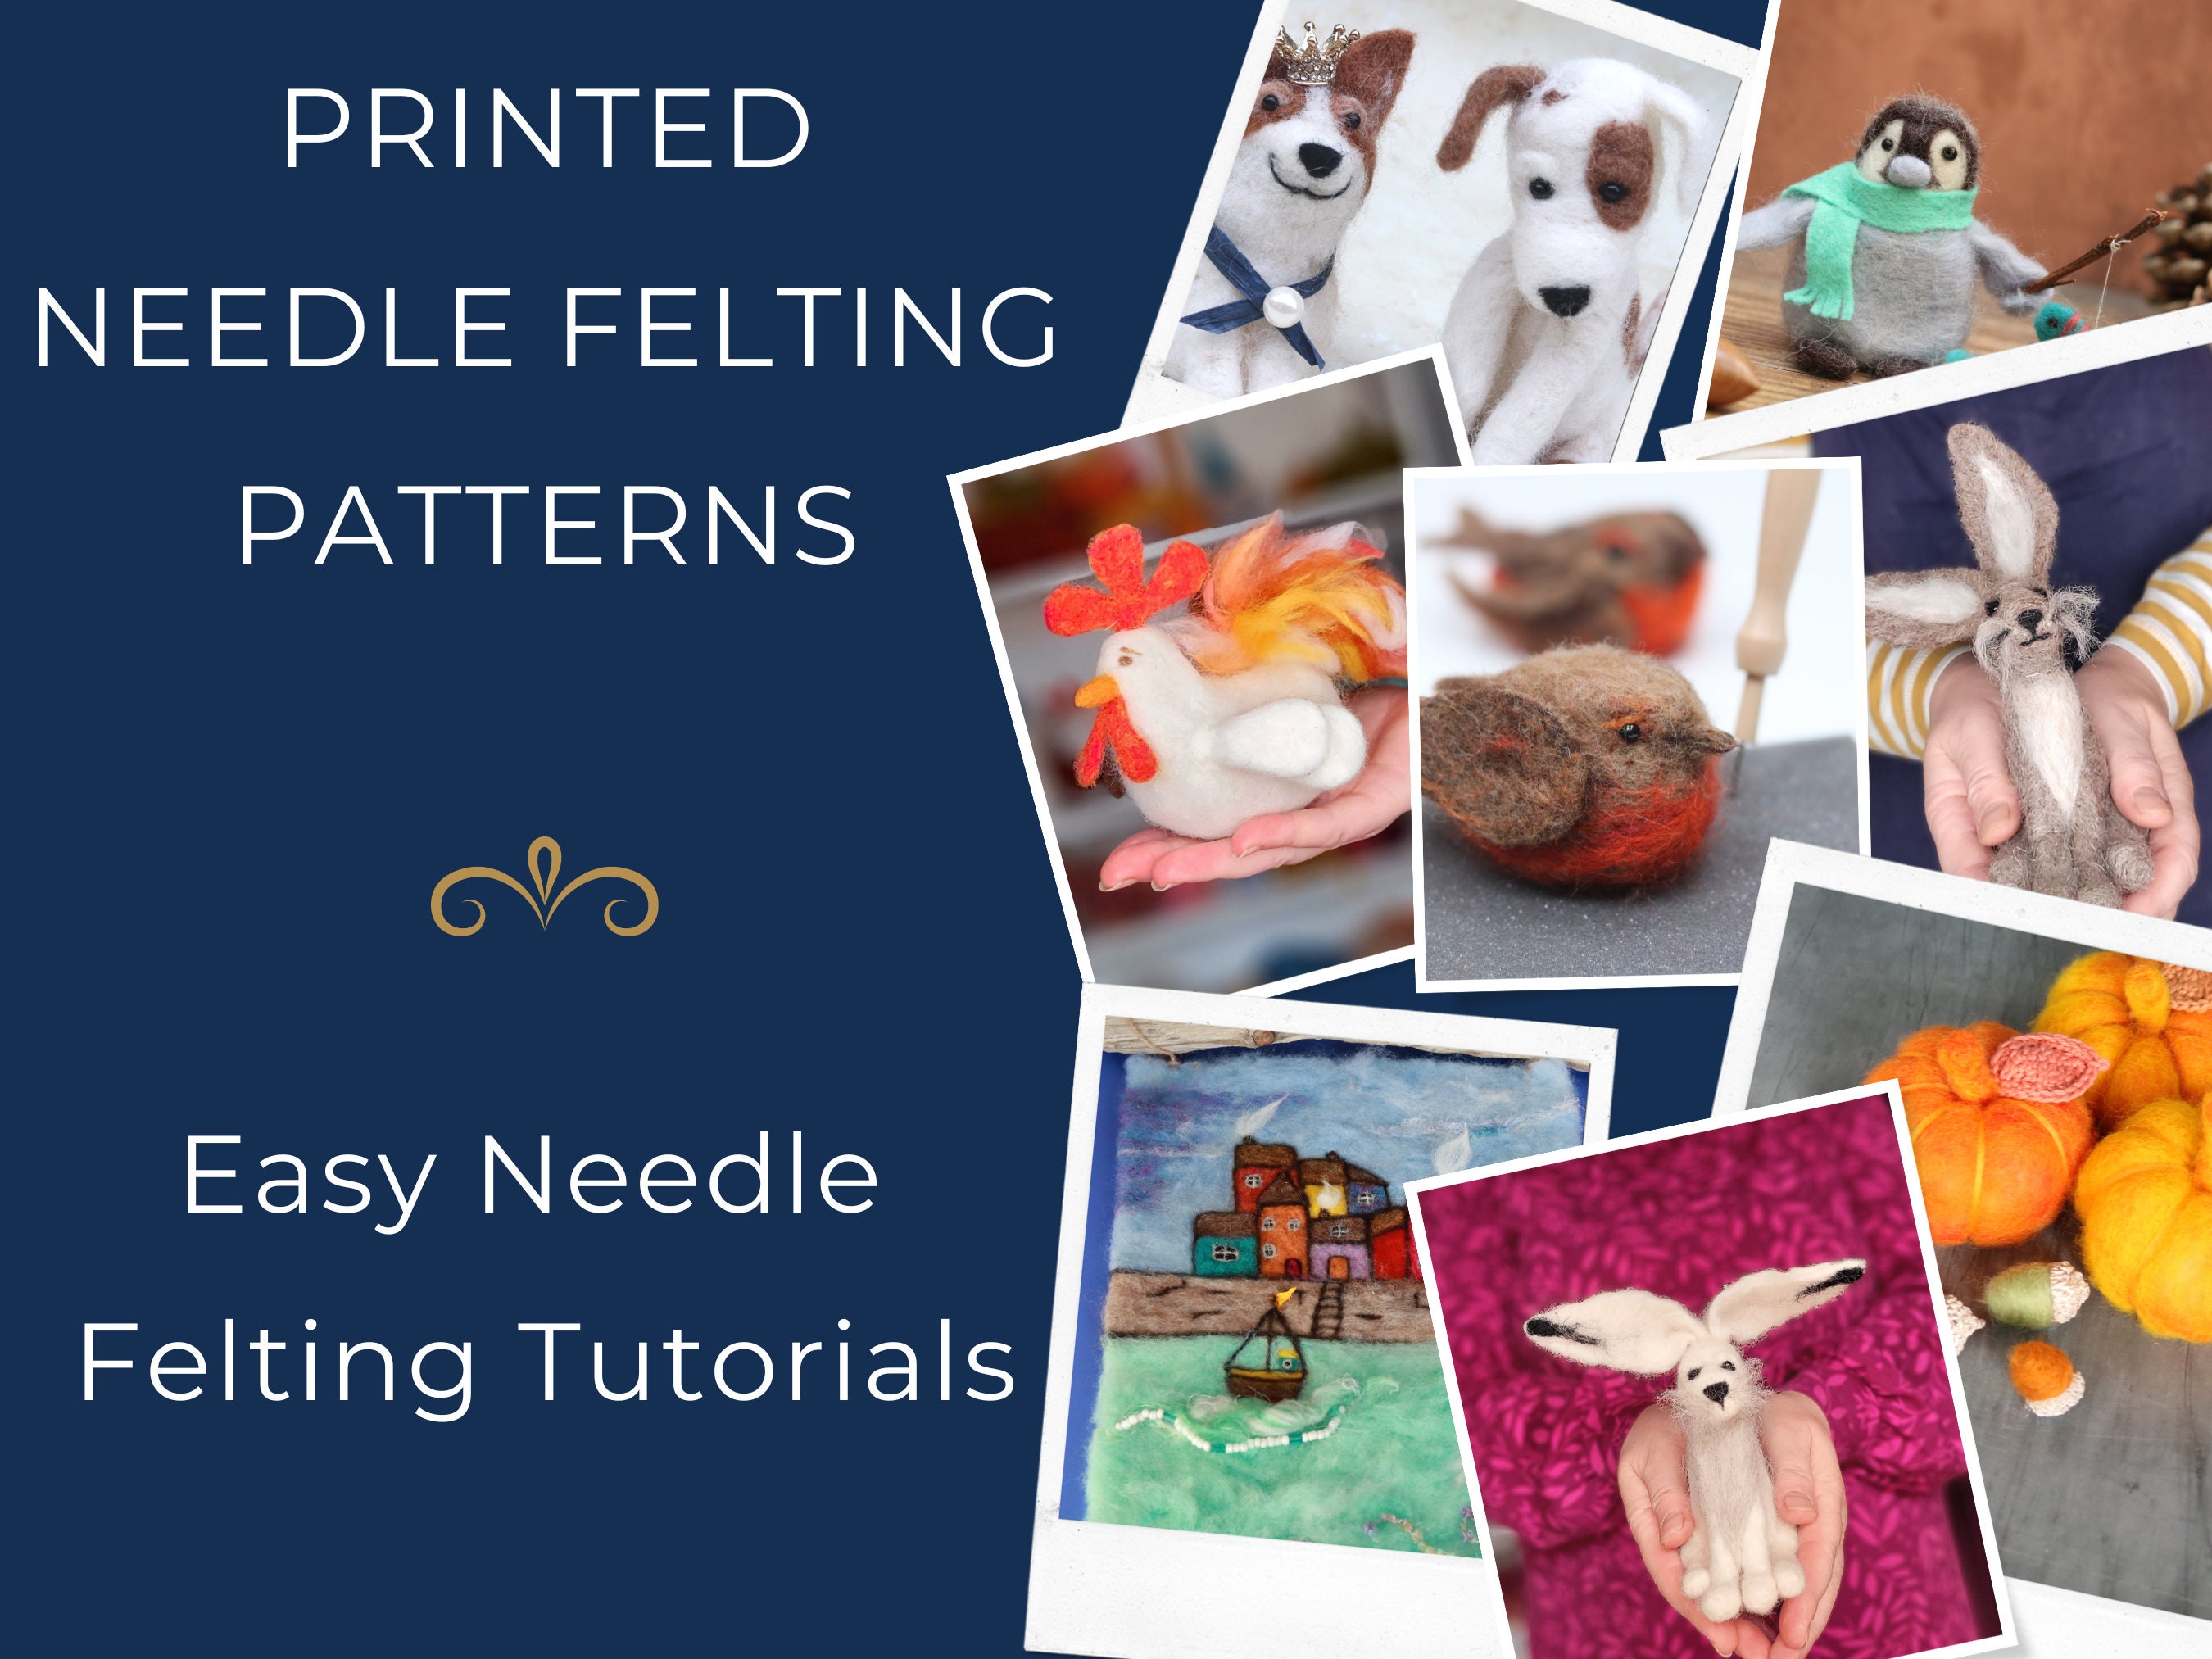 Printed Needle Felting Patterns Printed and Posted to You - Etsy UK